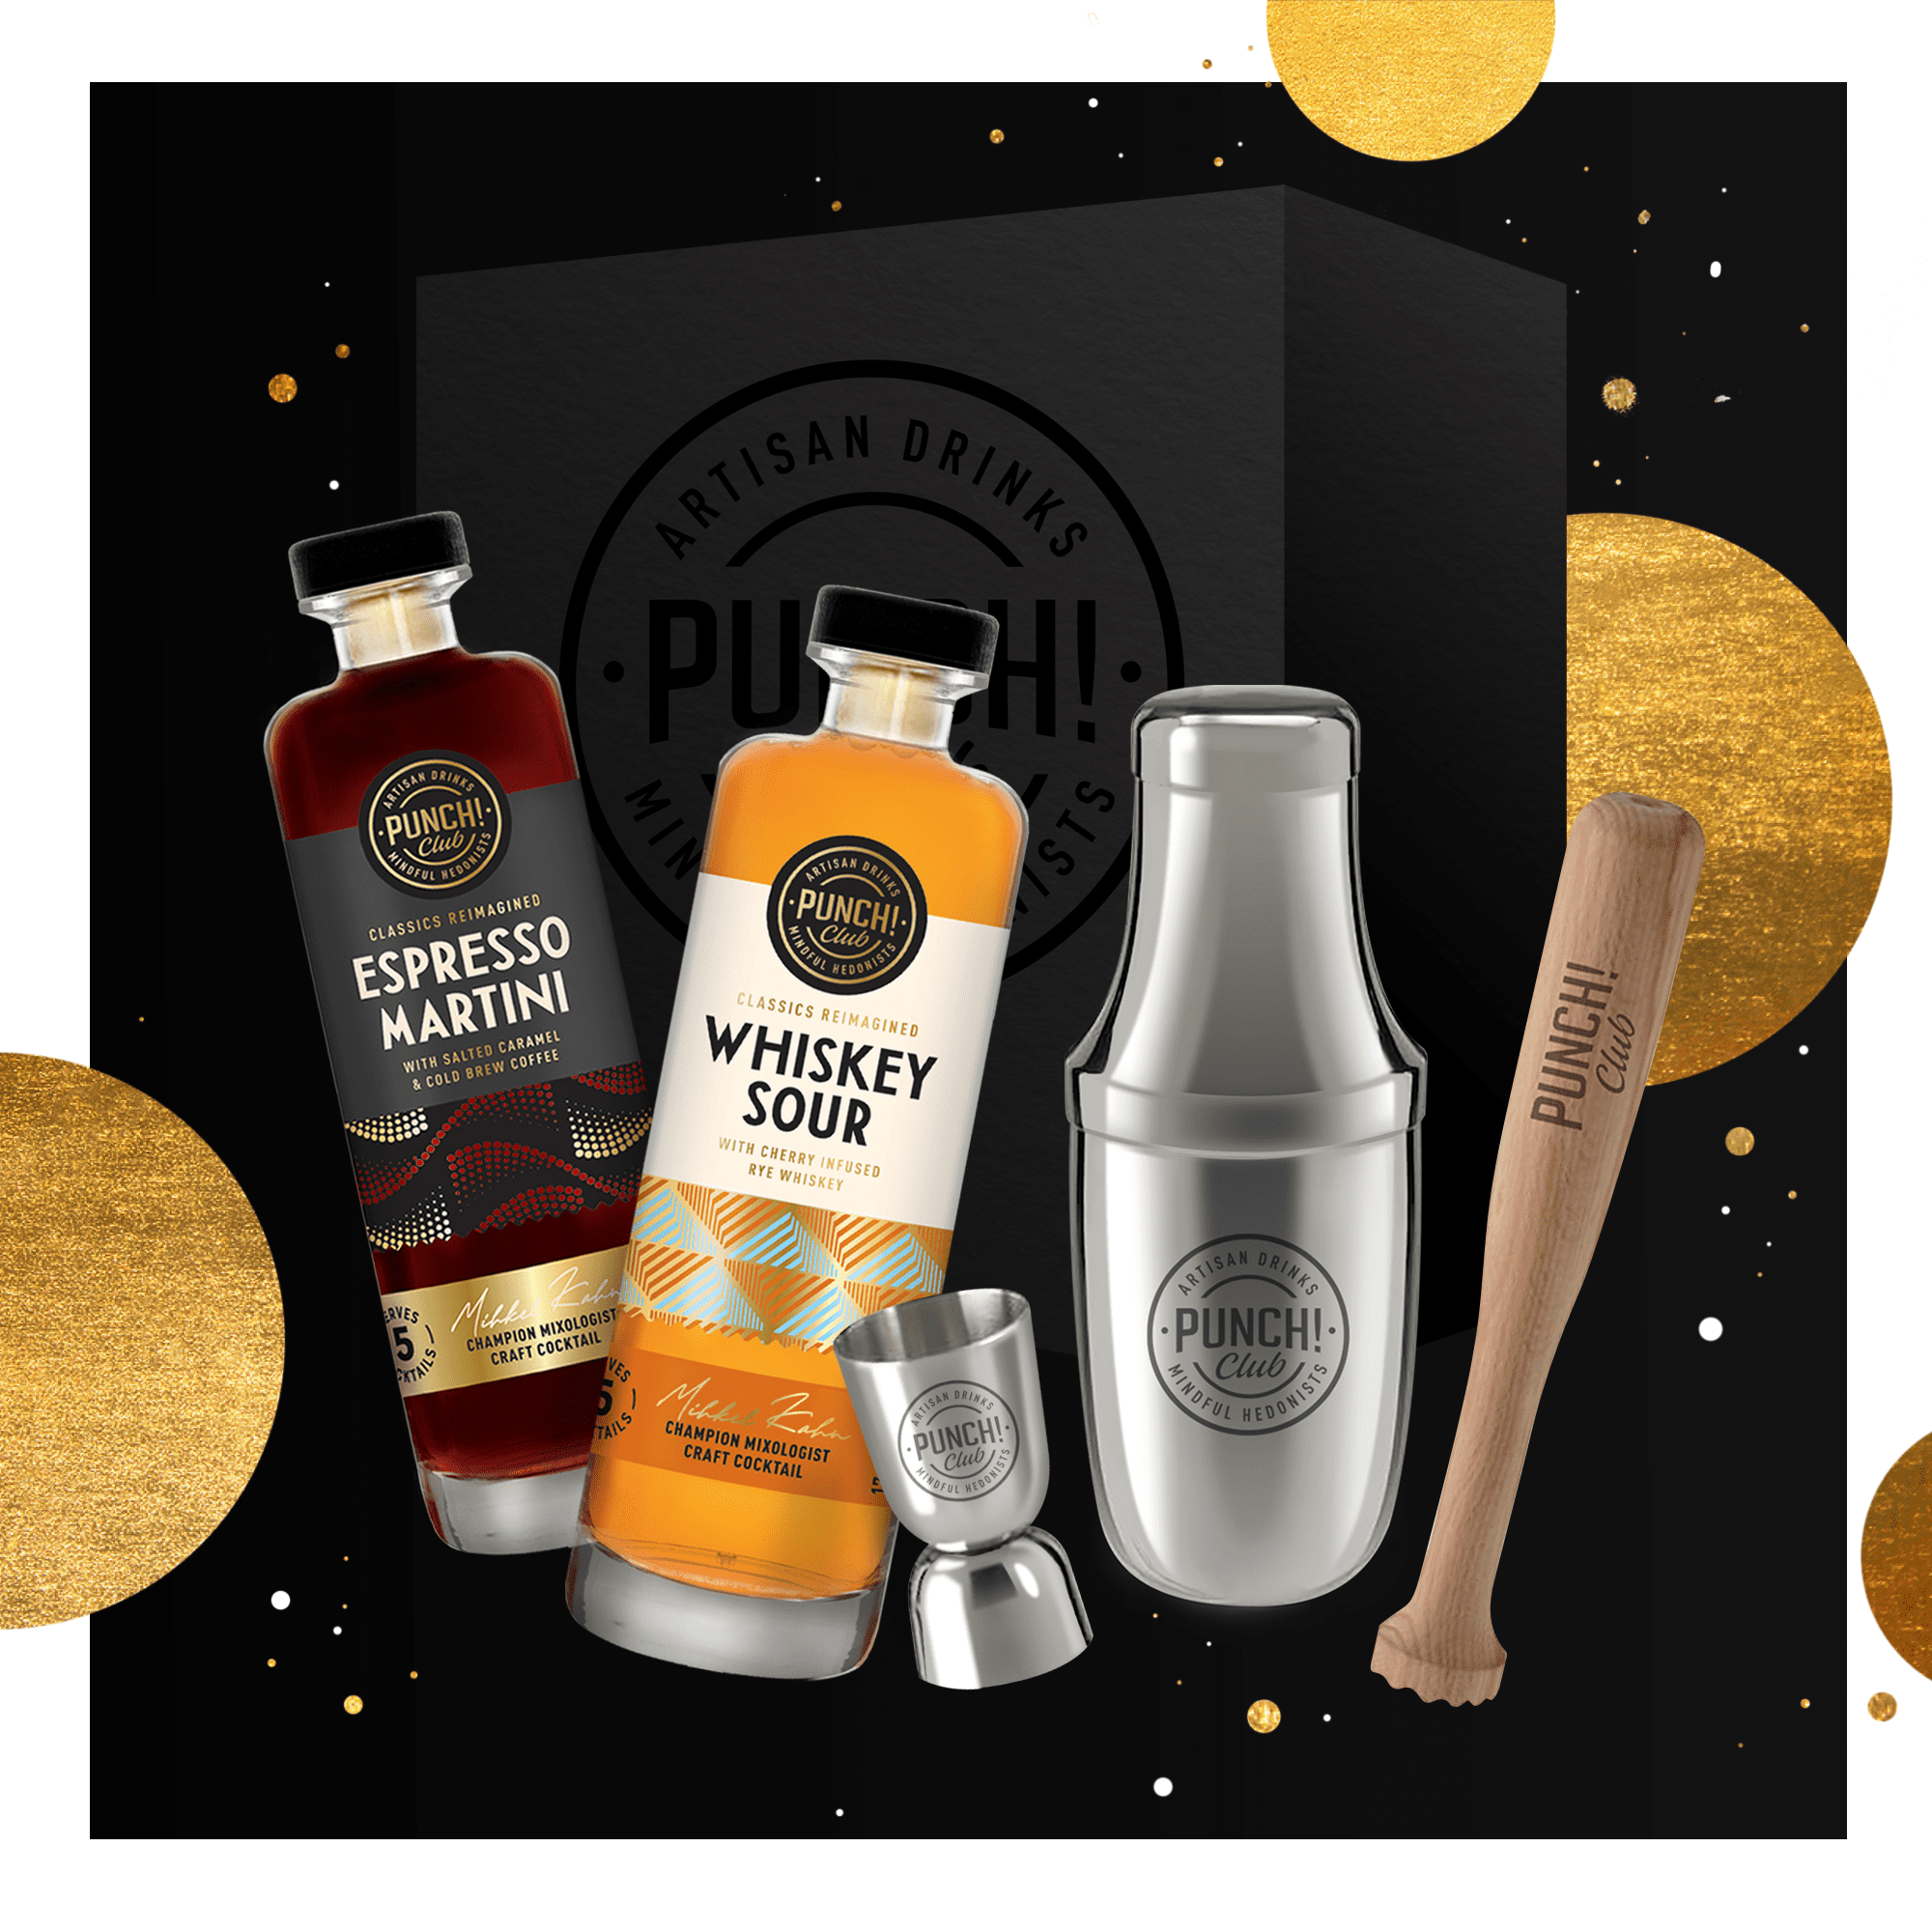 Punch Club gift box for cocktail lovers. Contains Espresso Martini, whiskey sour and cocktail preparation set: shaker, jigger, muddler